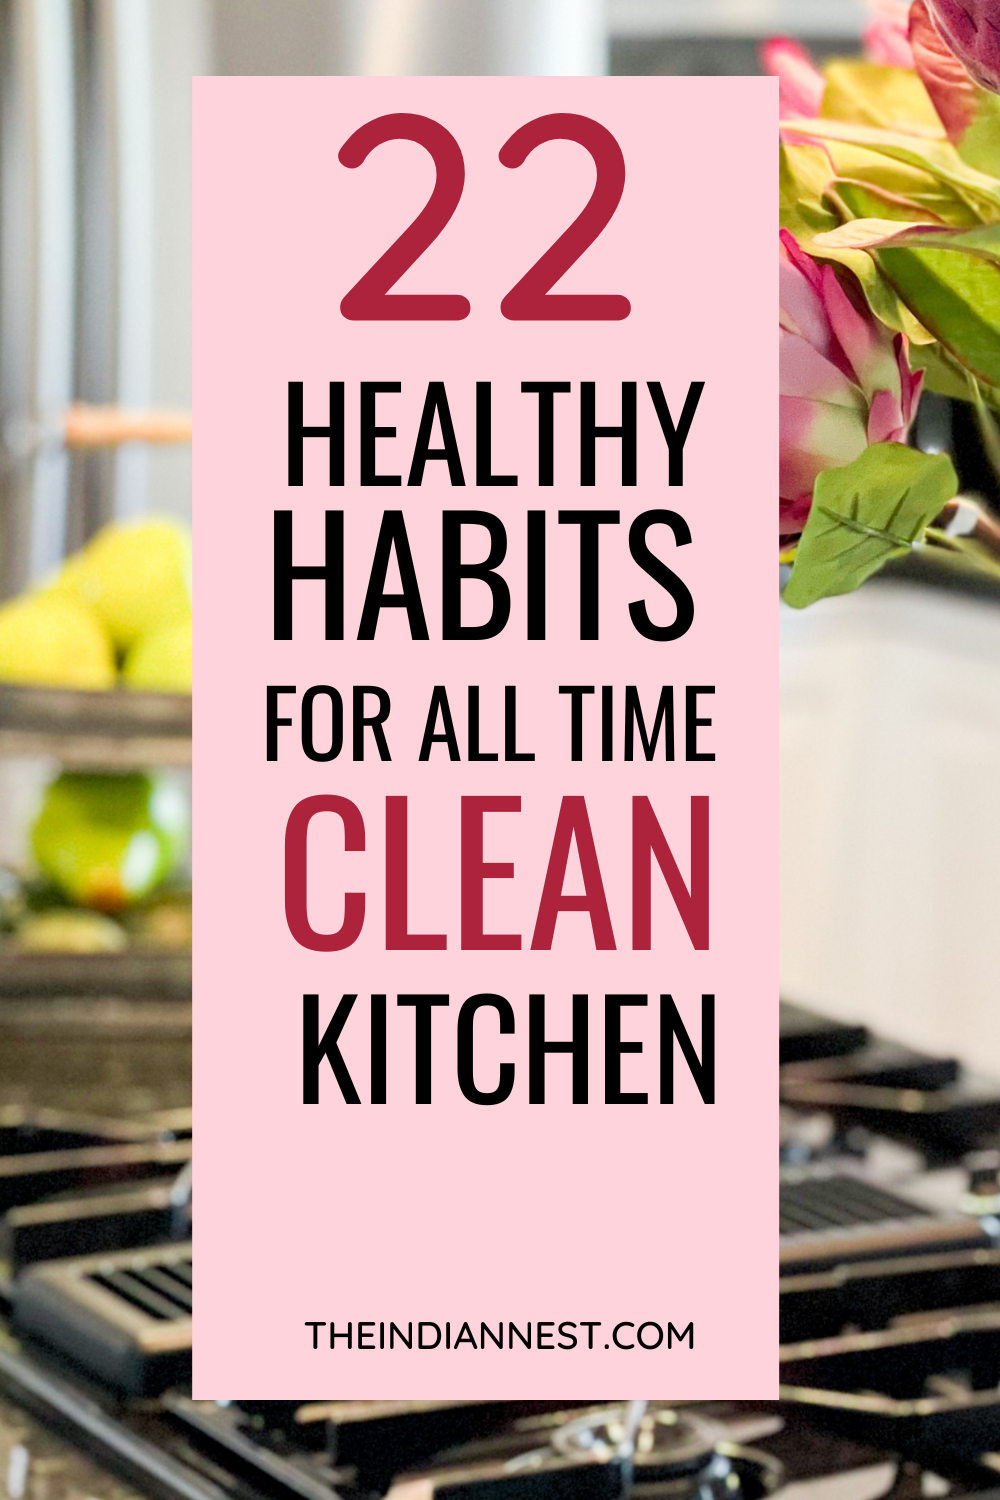 Here you have simple habits for a clean kitchen.